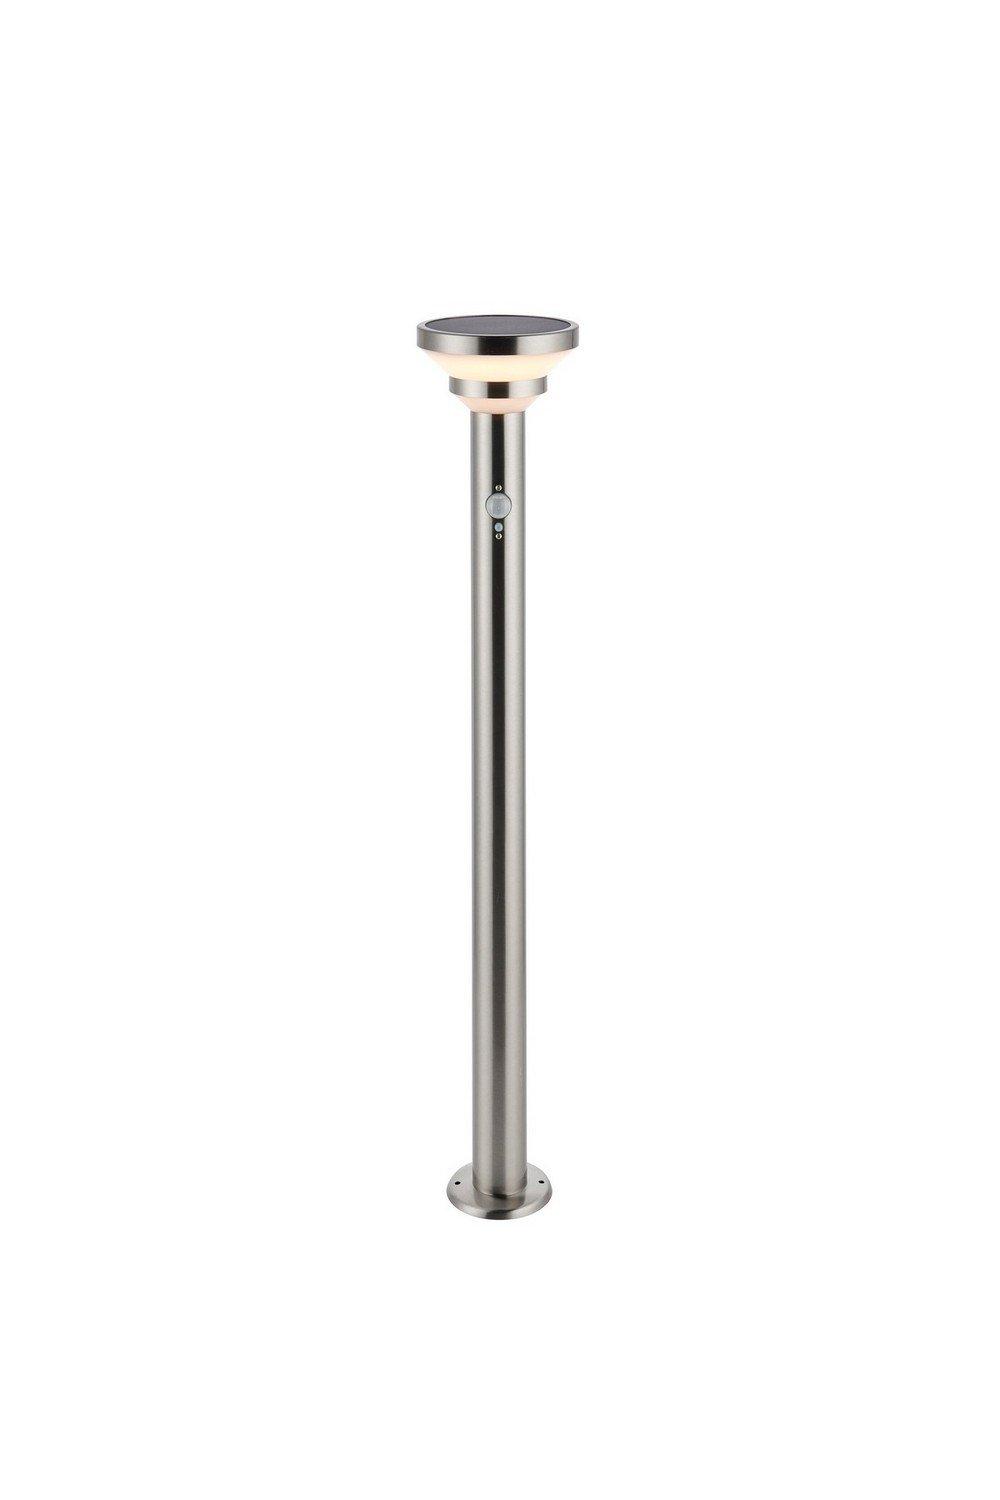 Modern Solar Powered Dimmable LED Tall Bollard Lamp Brushed Stainless Steel PIR Motion & Day Night S